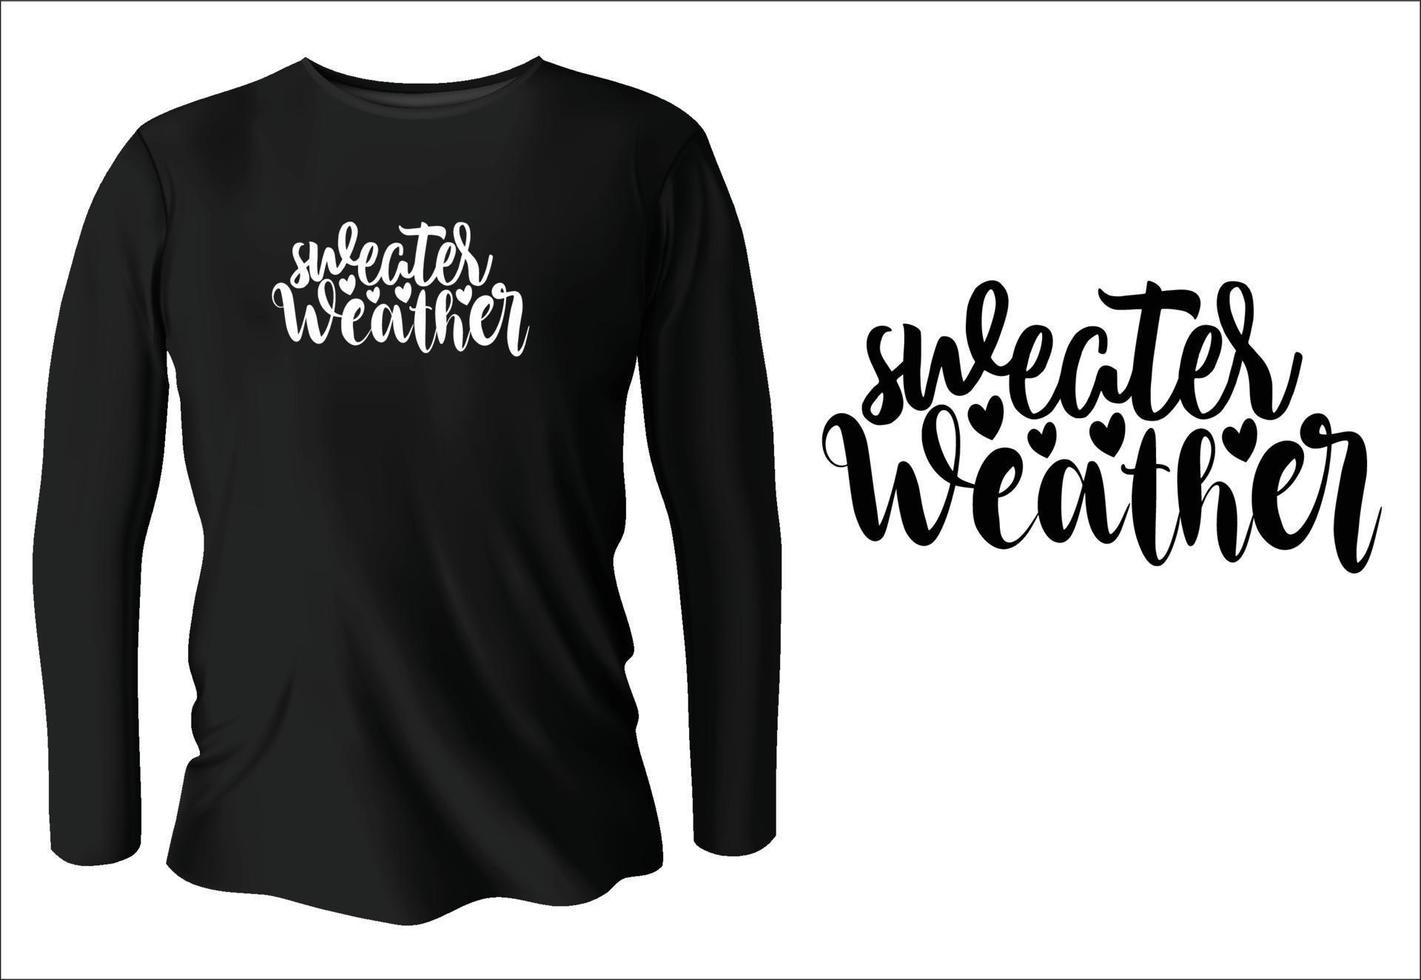 sweater weather t-shirt design with vector